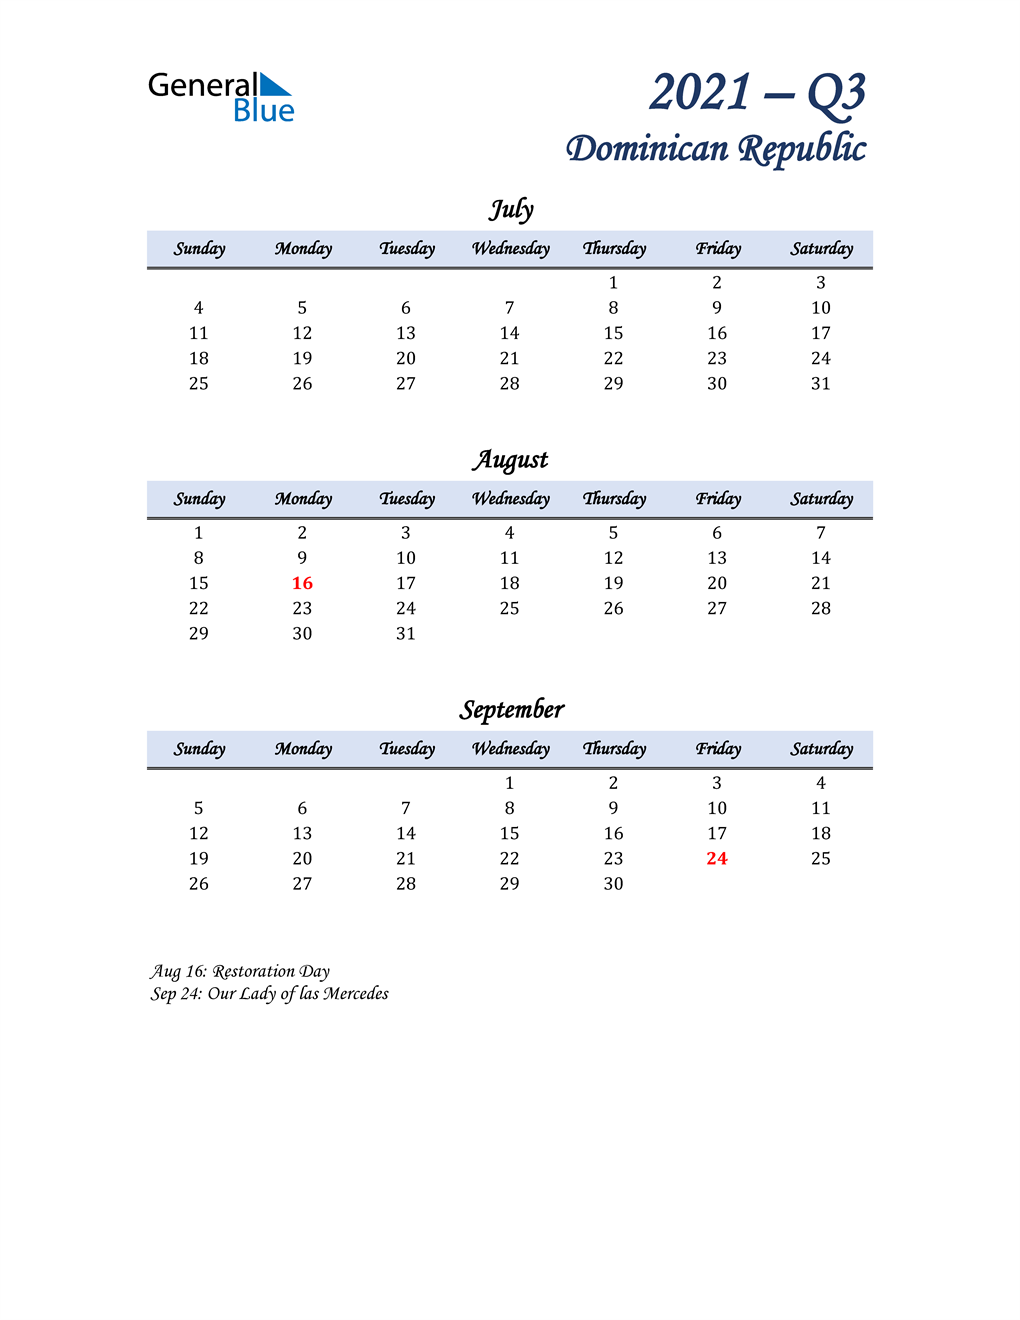  July, August, and September Calendar for Dominican Republic